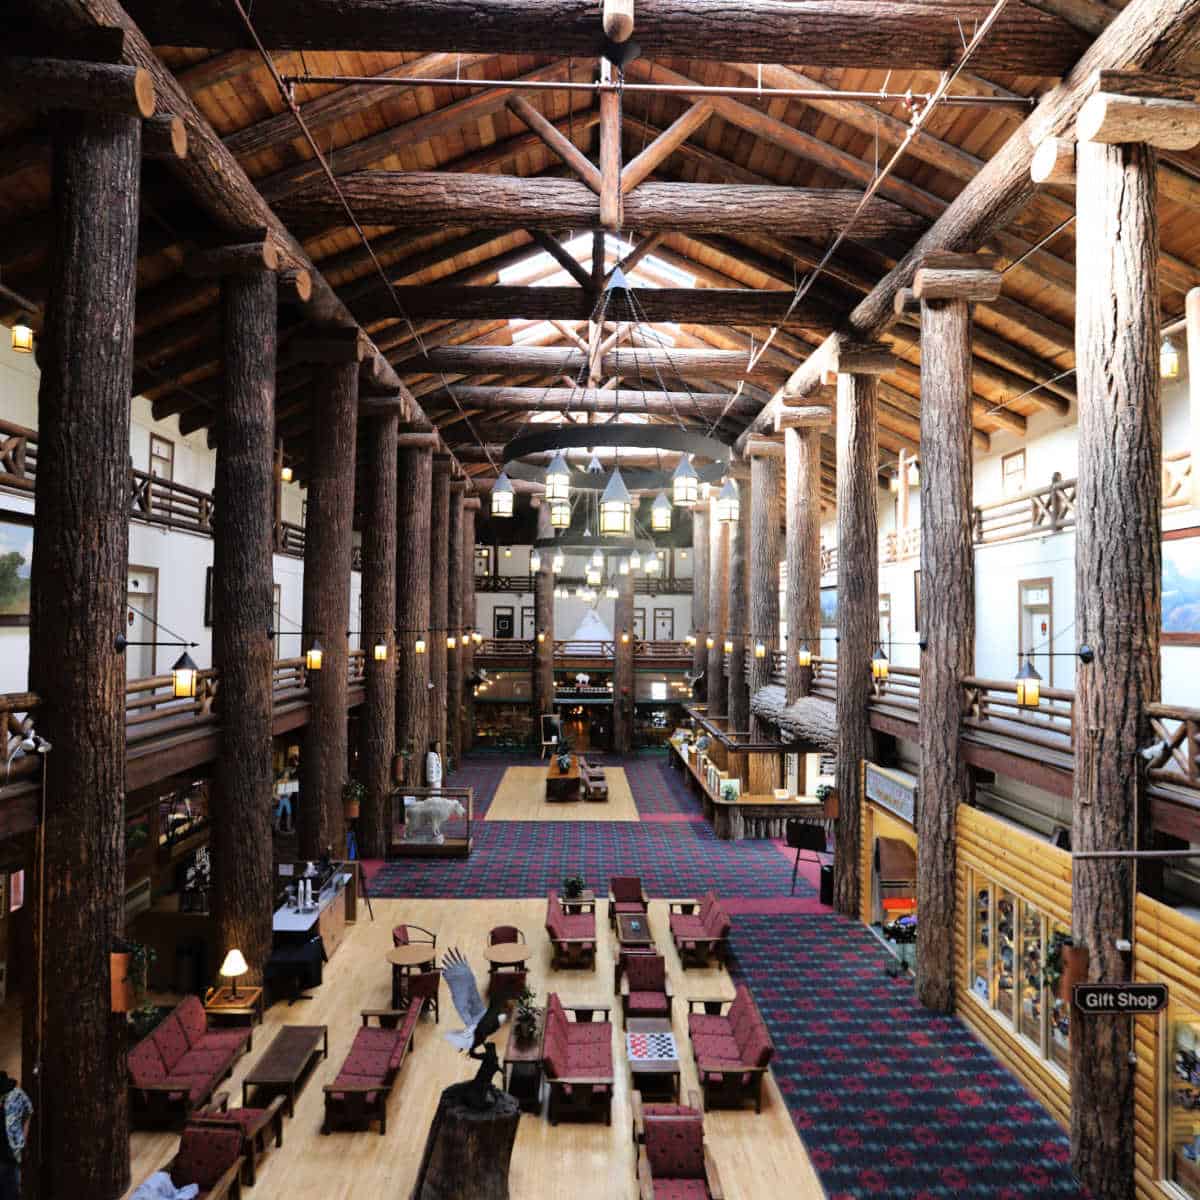 Historic Glacier Park Lodge lobby with giant tree trunk beams, seating, and chandelier